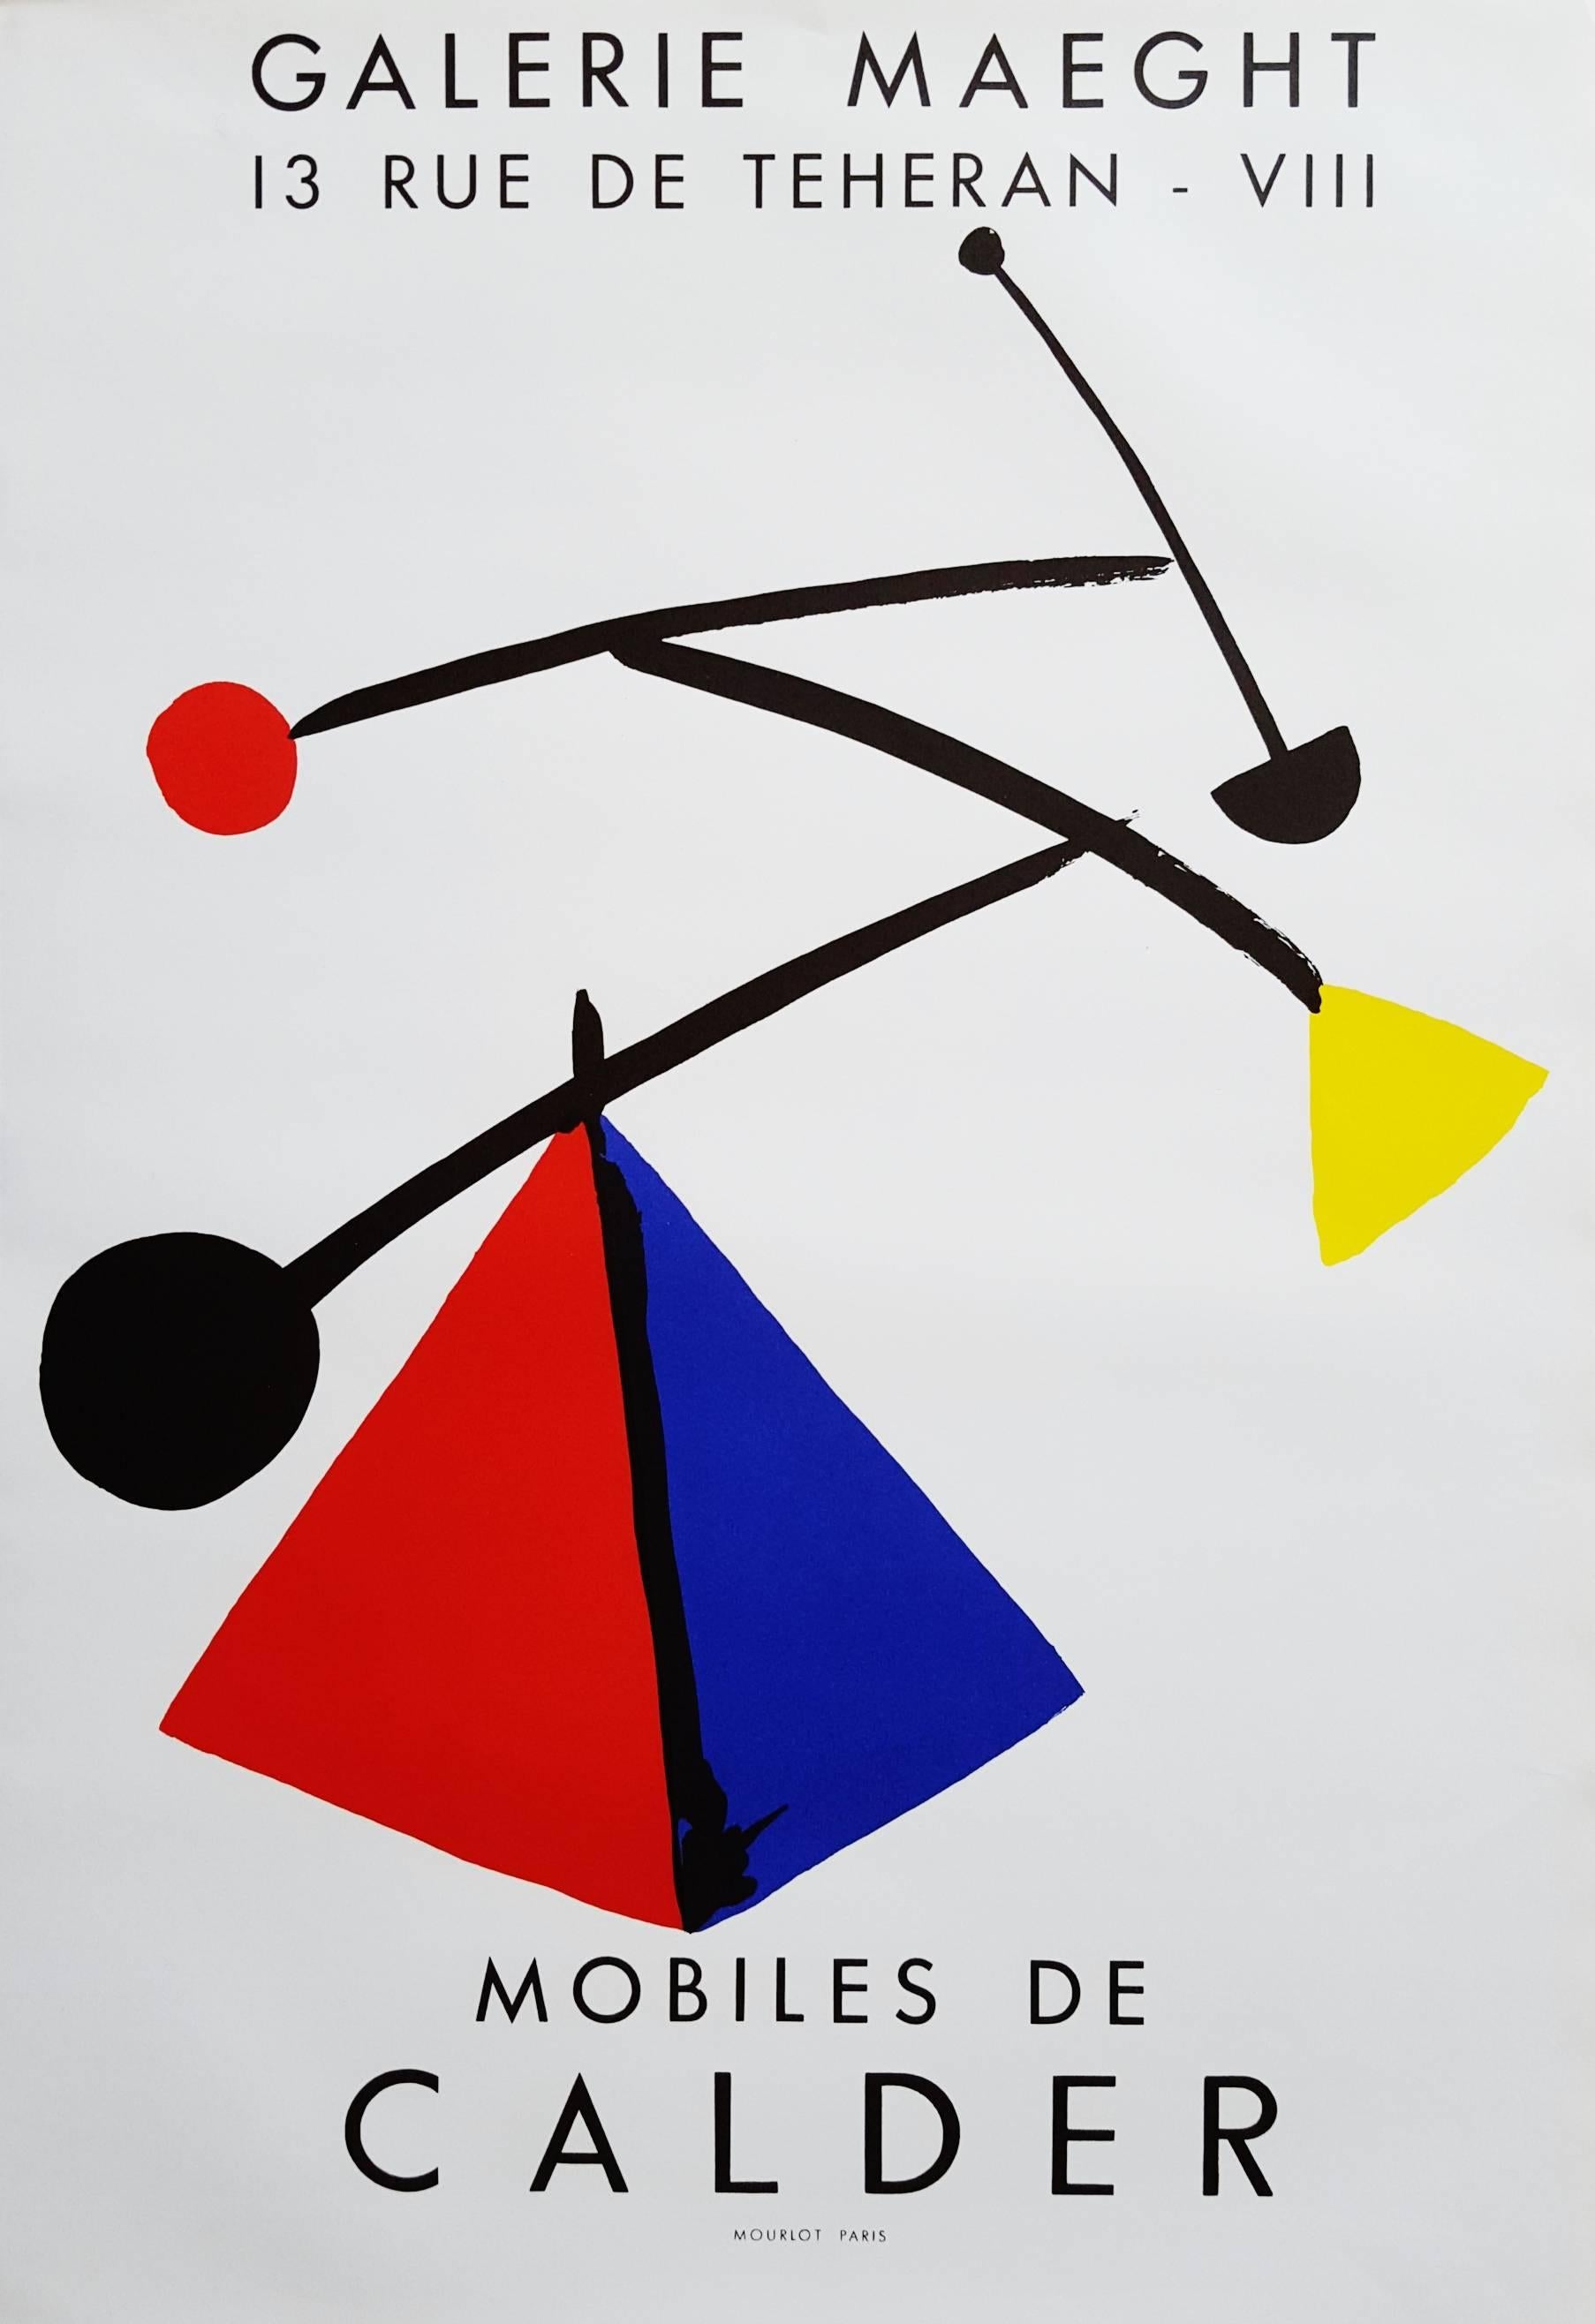 (after) Alexander Calder Abstract Print - Expo 54 - Galerie Maeght